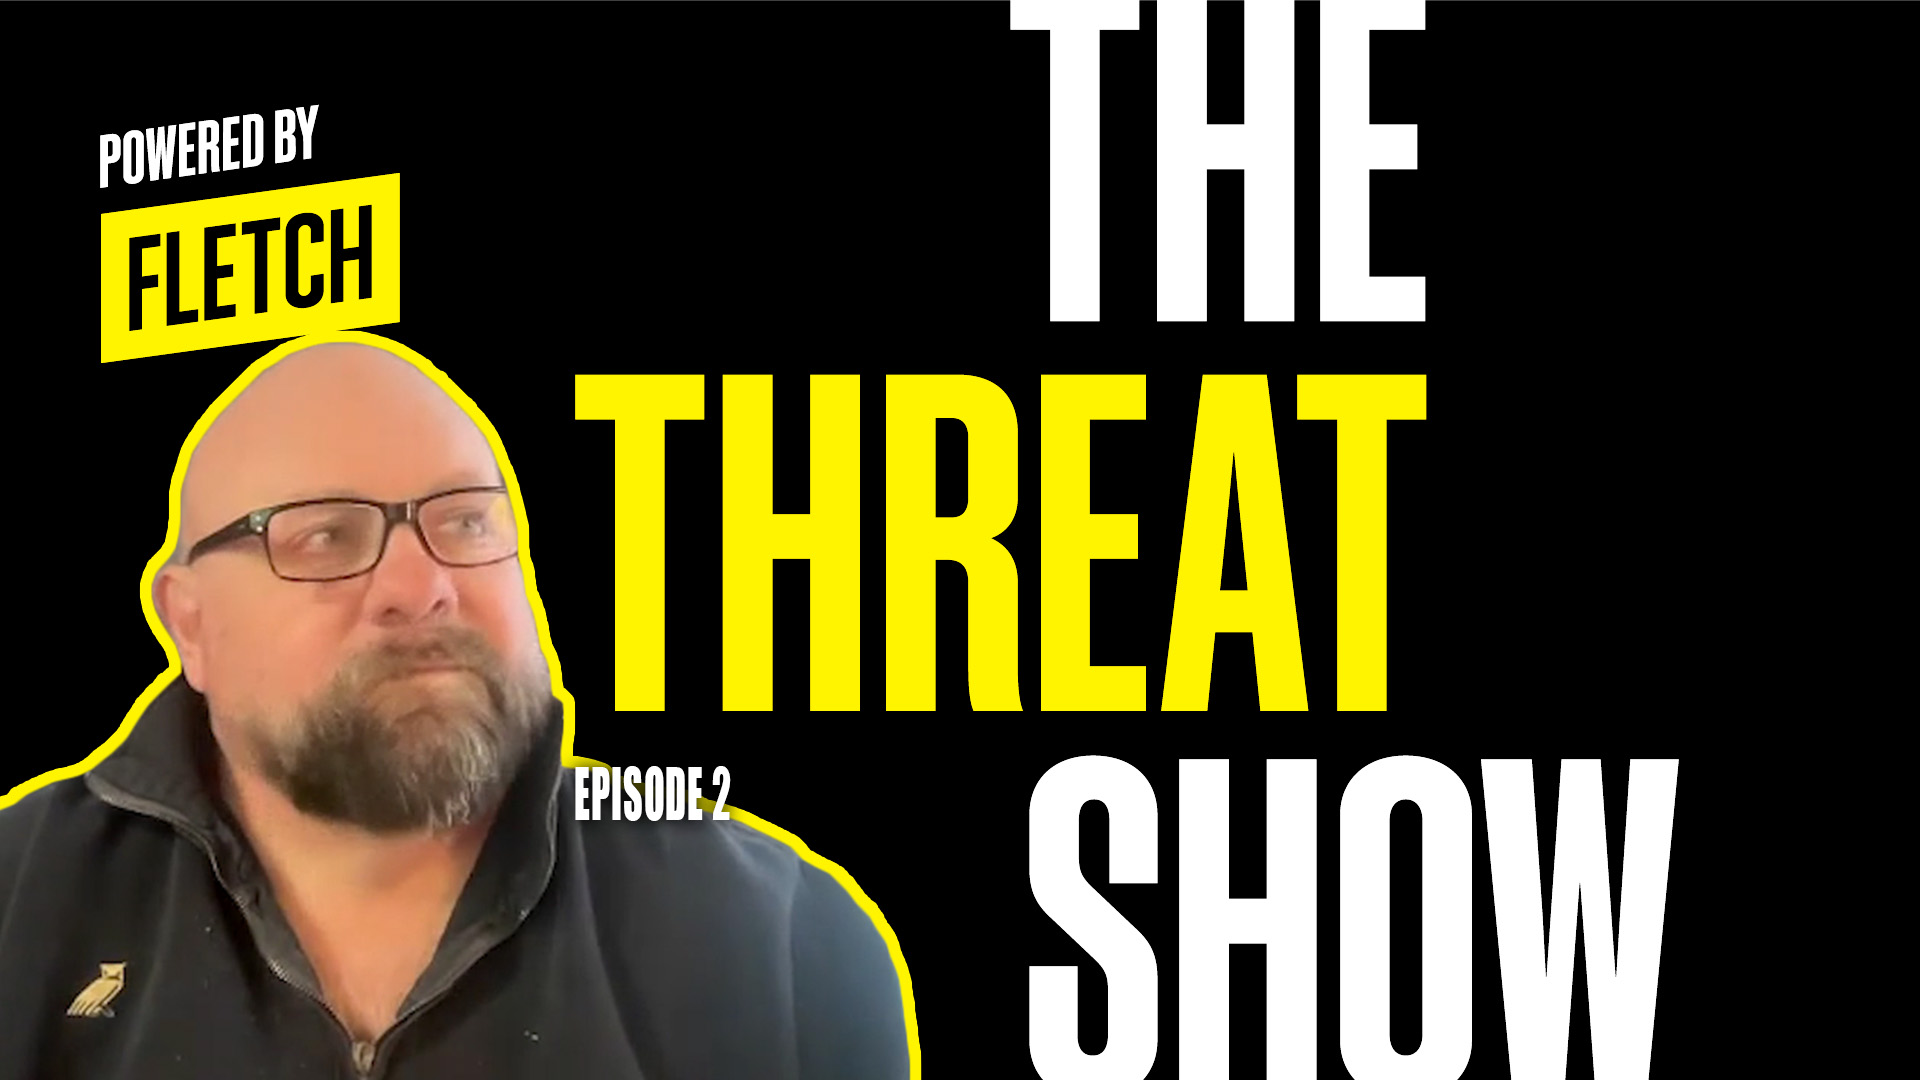 The Threat Show Ep.2